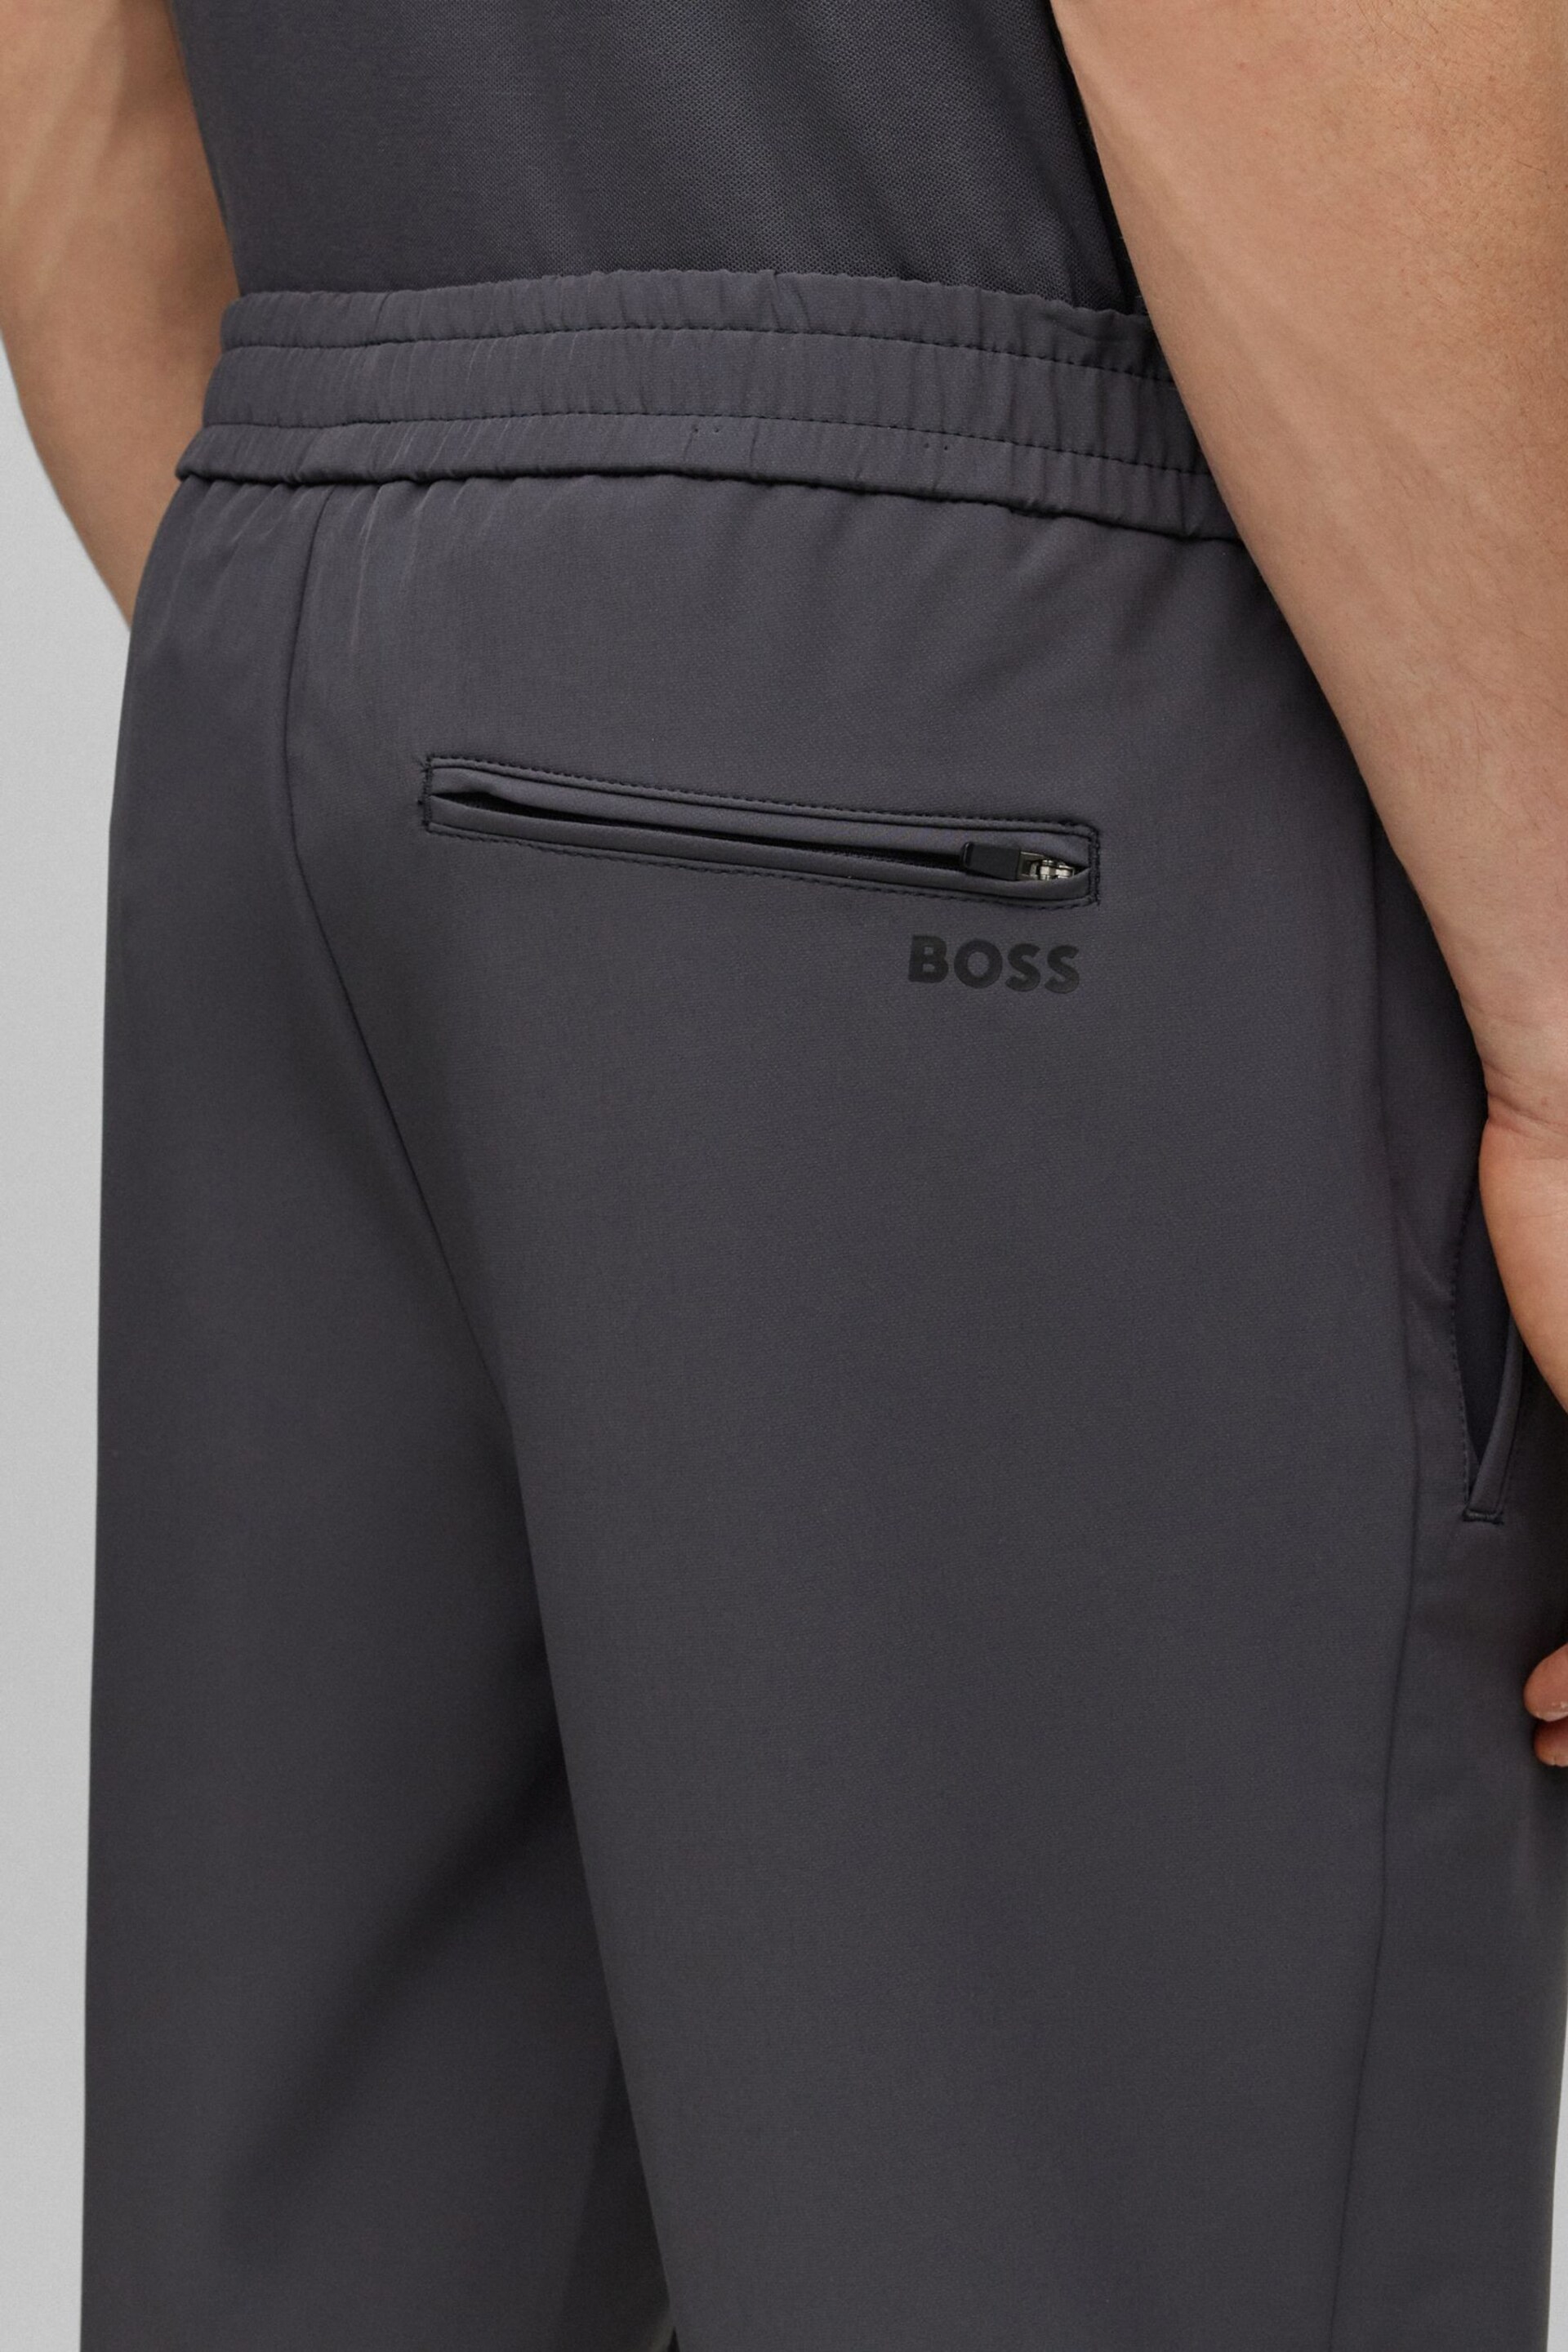 BOSS Grey Tapered Fit Joggers - Image 4 of 5